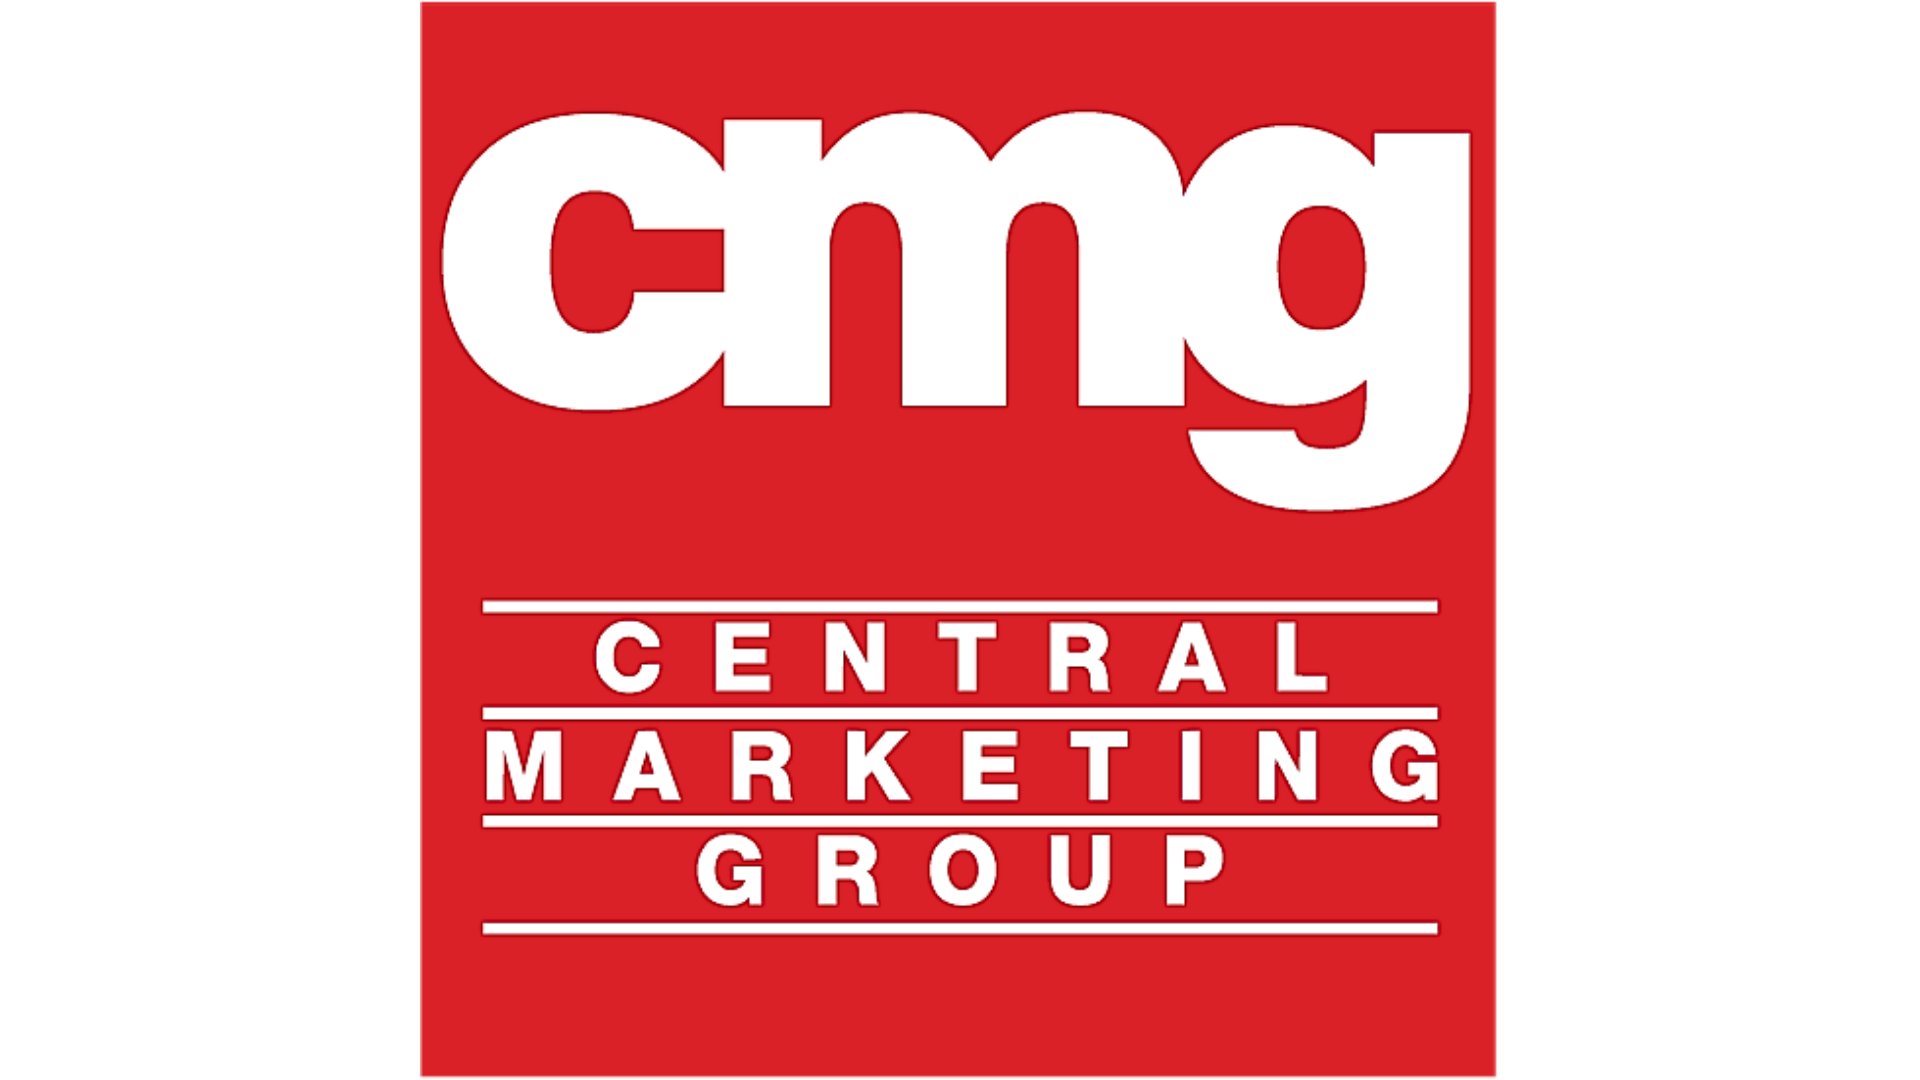 CENTRAL MARKETING GROUP